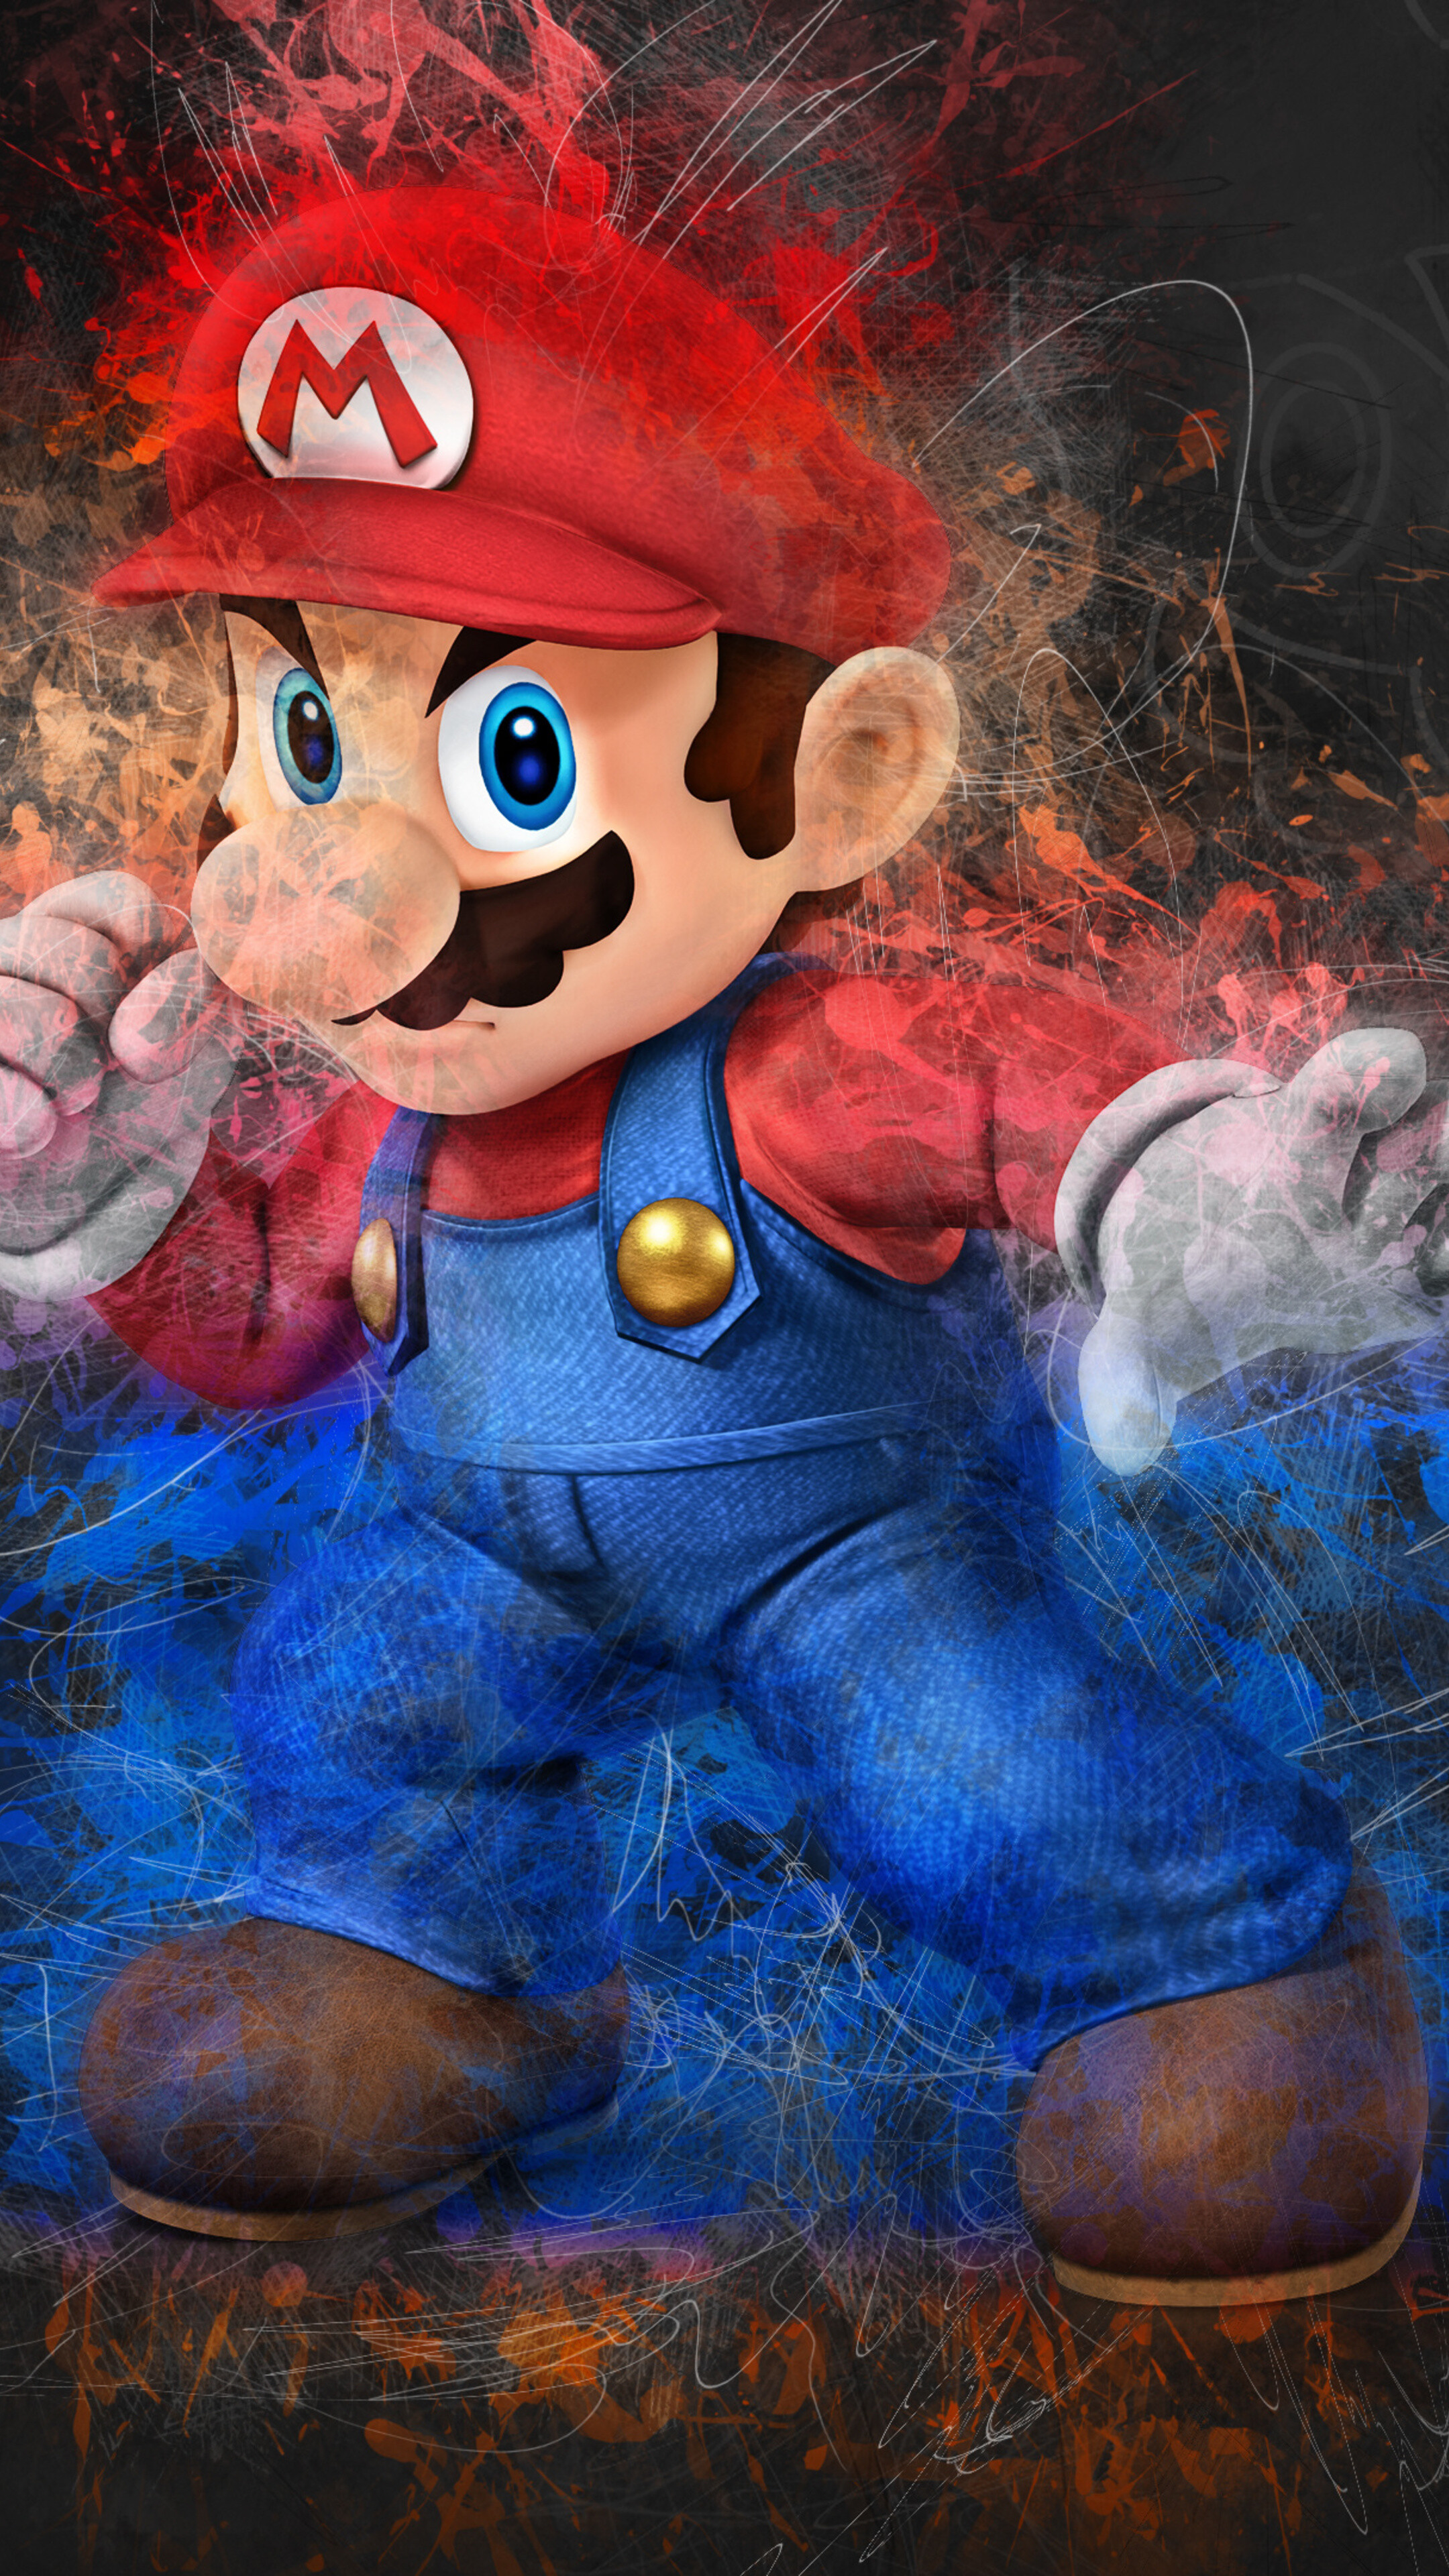 Mario artwork wallpapers, Sony Xperia X series, High-quality 4K images, Gaming visuals, 2160x3840 4K Phone